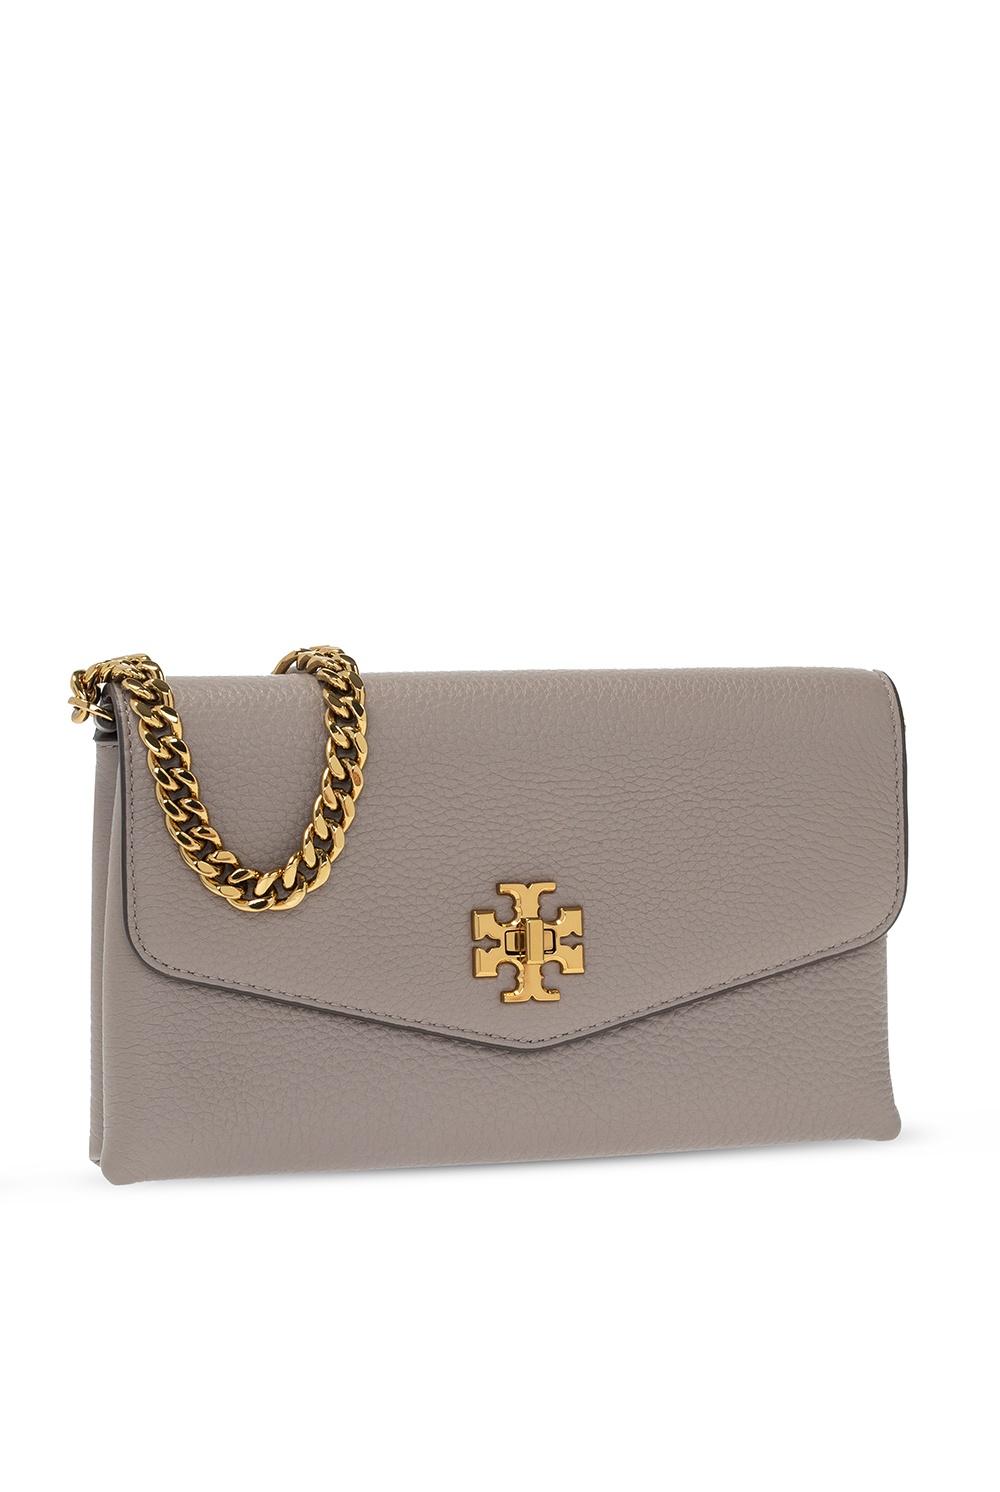 TORY BURCH KIRA PEBBLE LEATHER CHAIN WALLET NWT